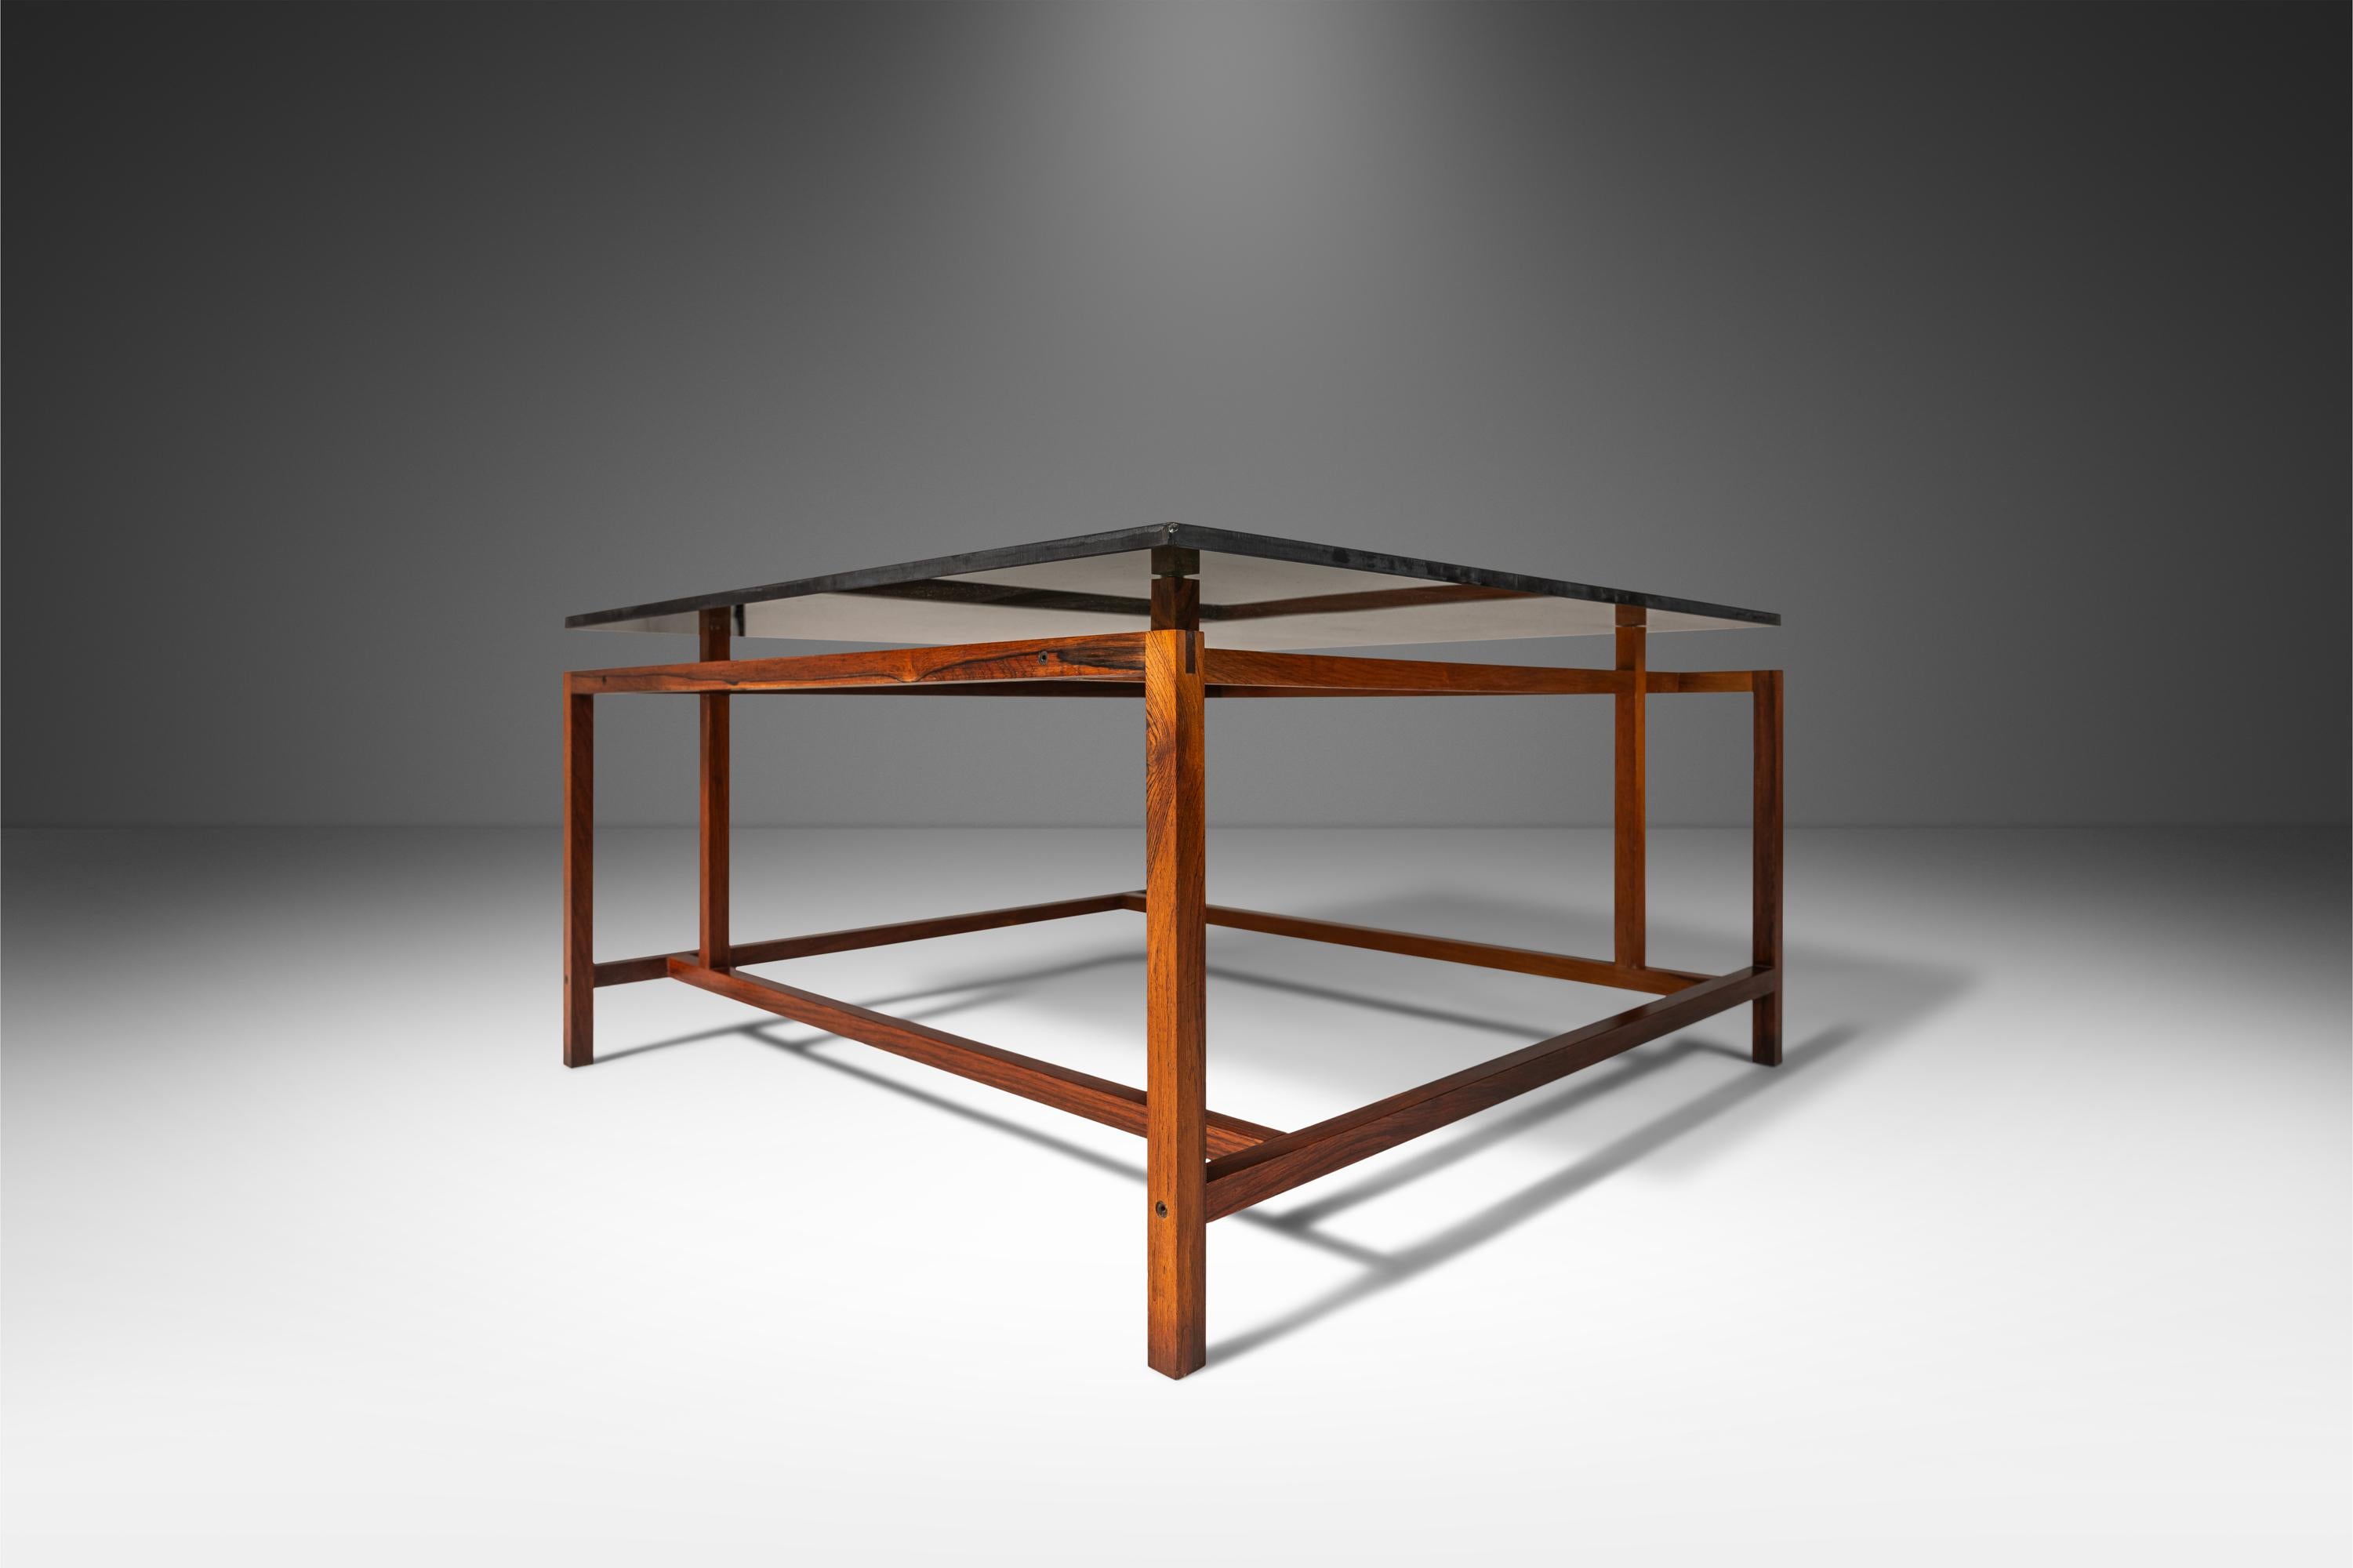 Danish Rosewood & Smoked Glass Coffee Table by Henning Nørgaard, Denmark, c. 1960's For Sale